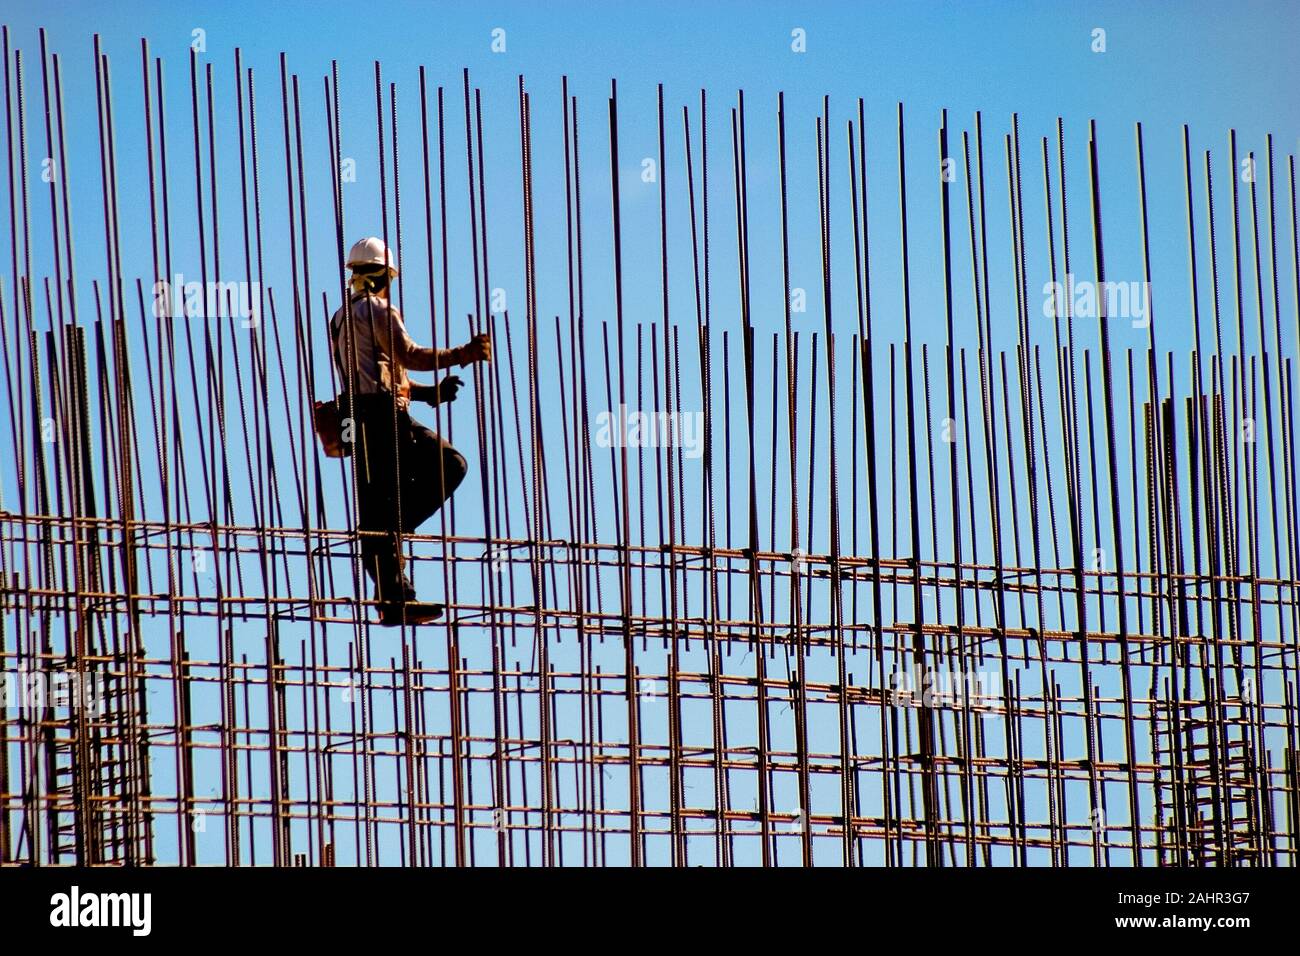 Construction worker in hard hat standing on rows of thin rebar Stock Photo